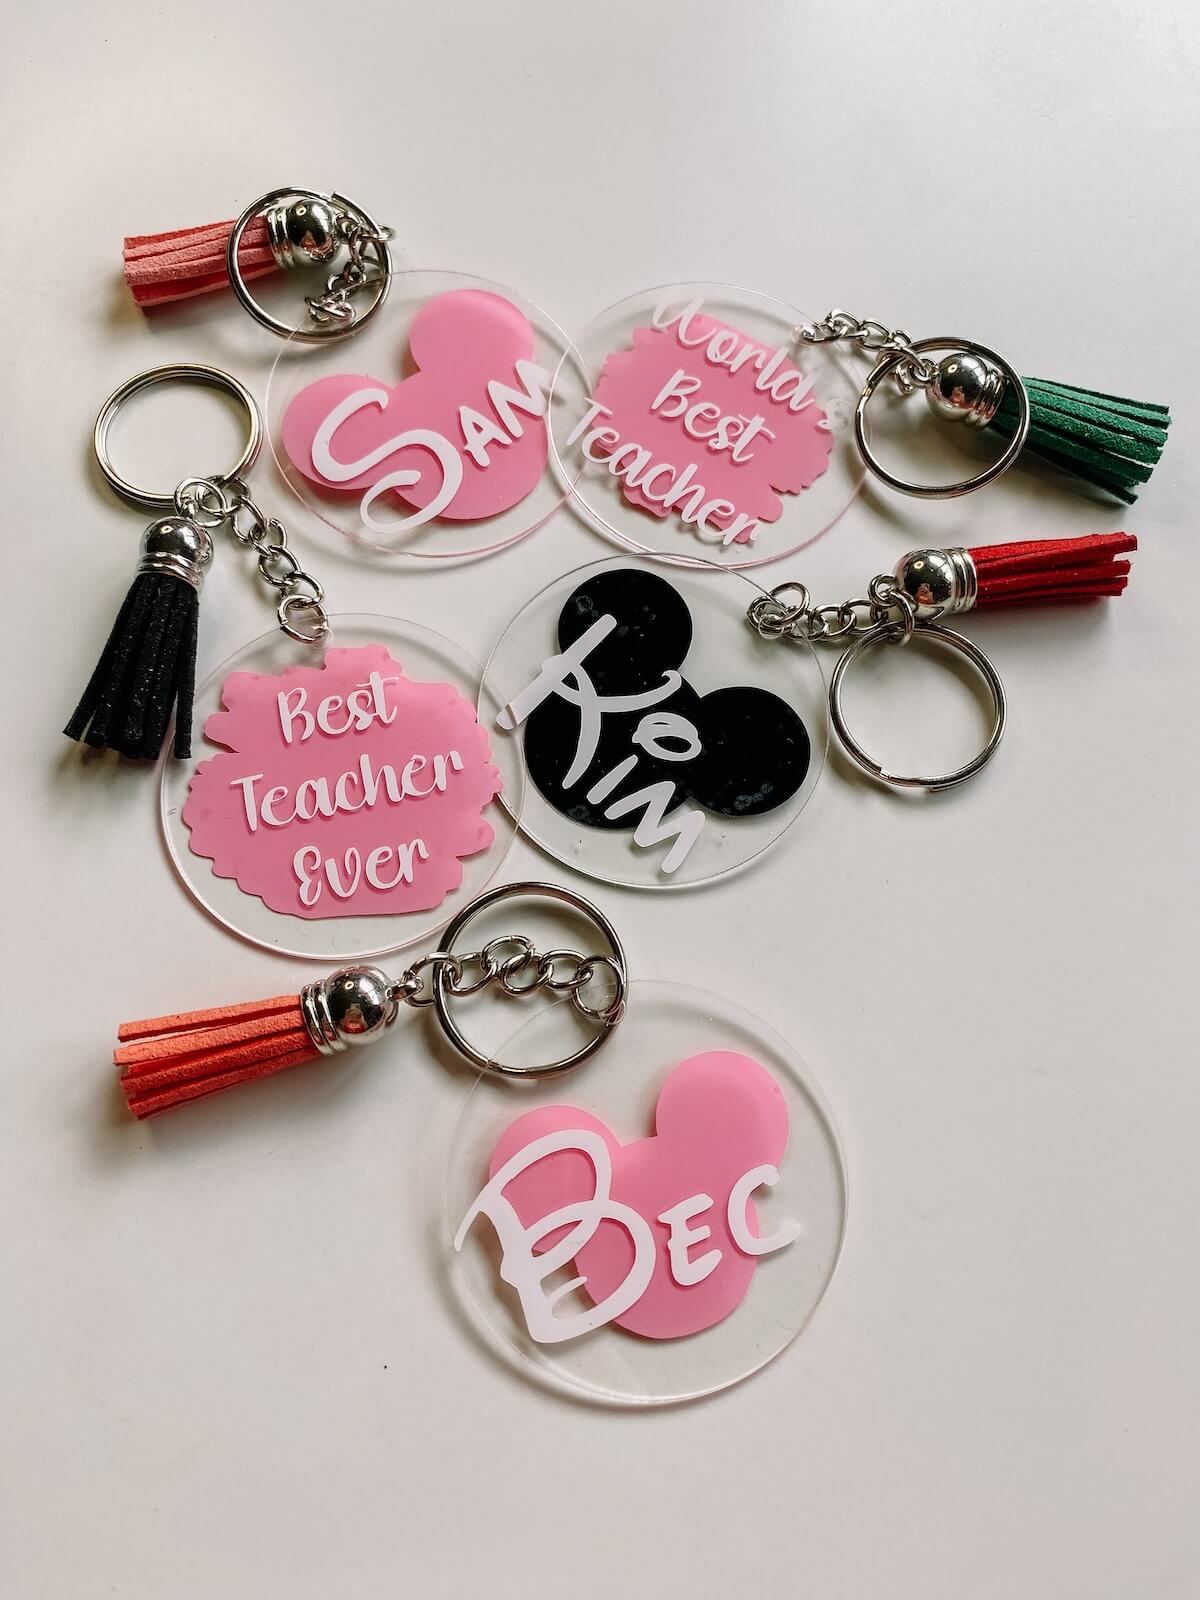 Personalised keychains made with acrylic circles and cricut joy.